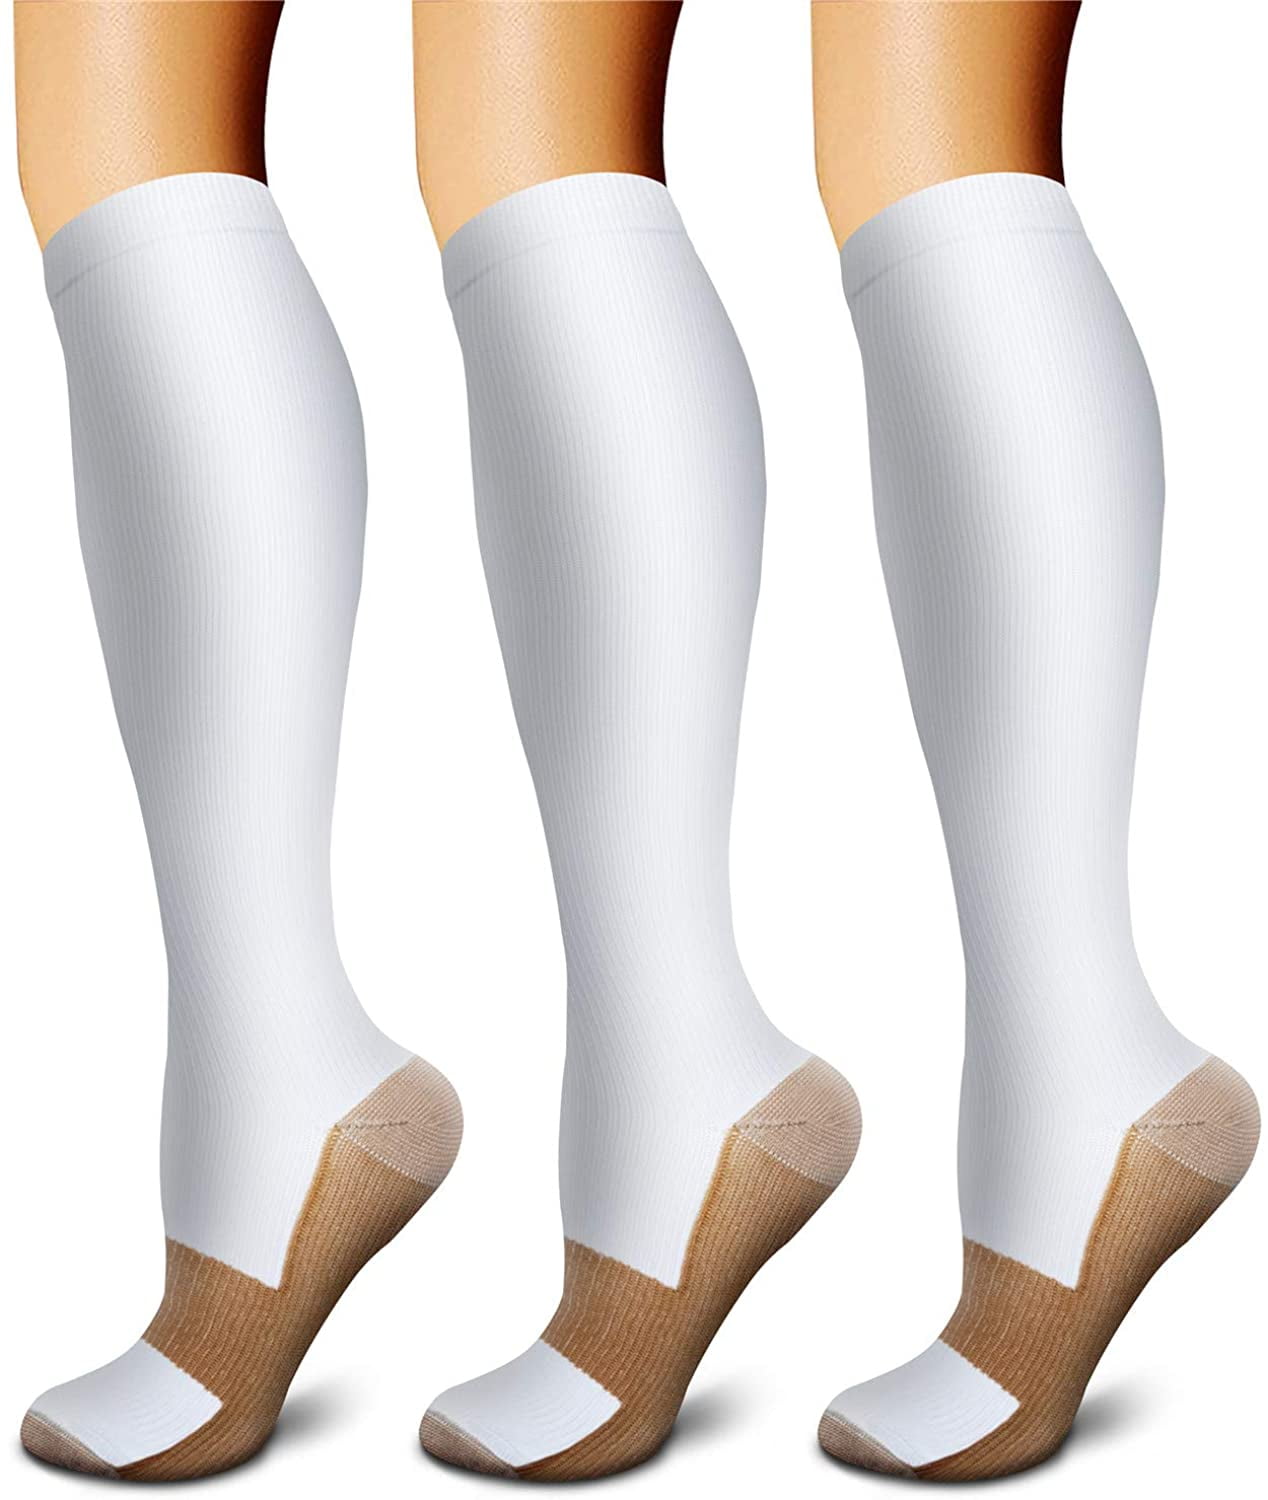 3 Pairs Copper Compression Socks Running Climbing 15-20 mmHg Circulation is Best Athletic & Daily for Men & Women 